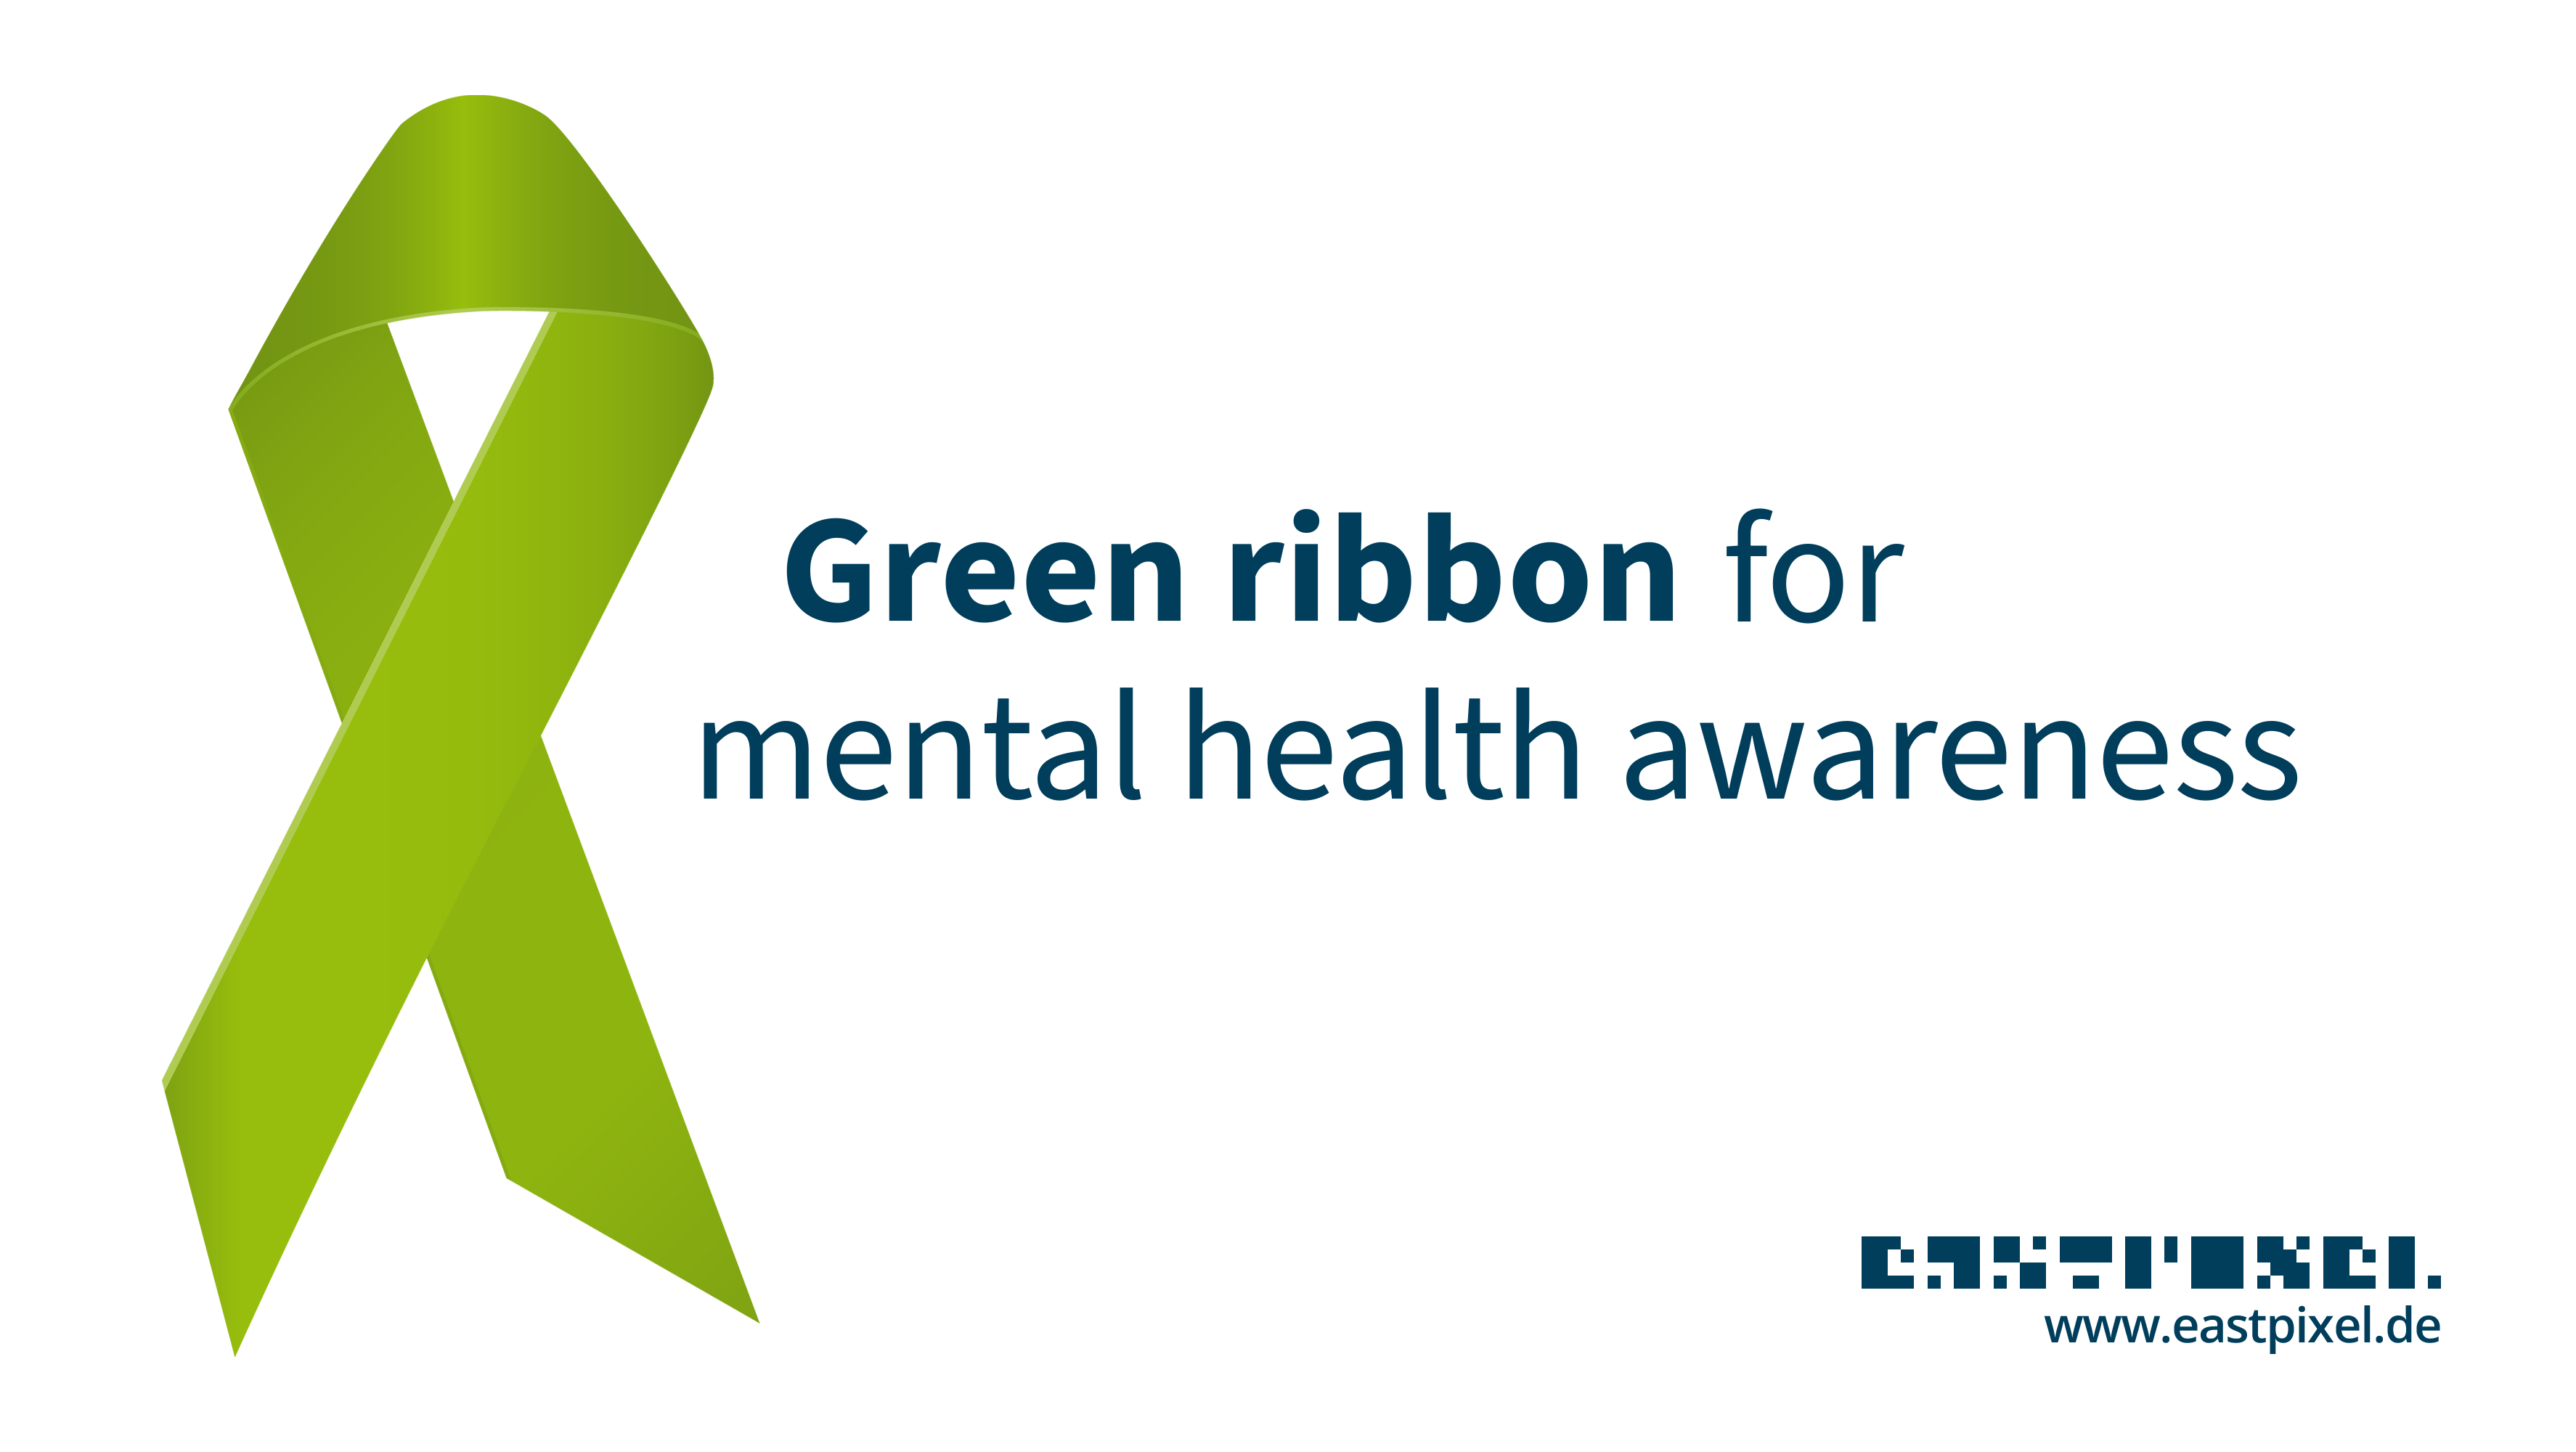 EASTPIXEL supports Green Ribbon. Green Ribbon for mental health awareness.